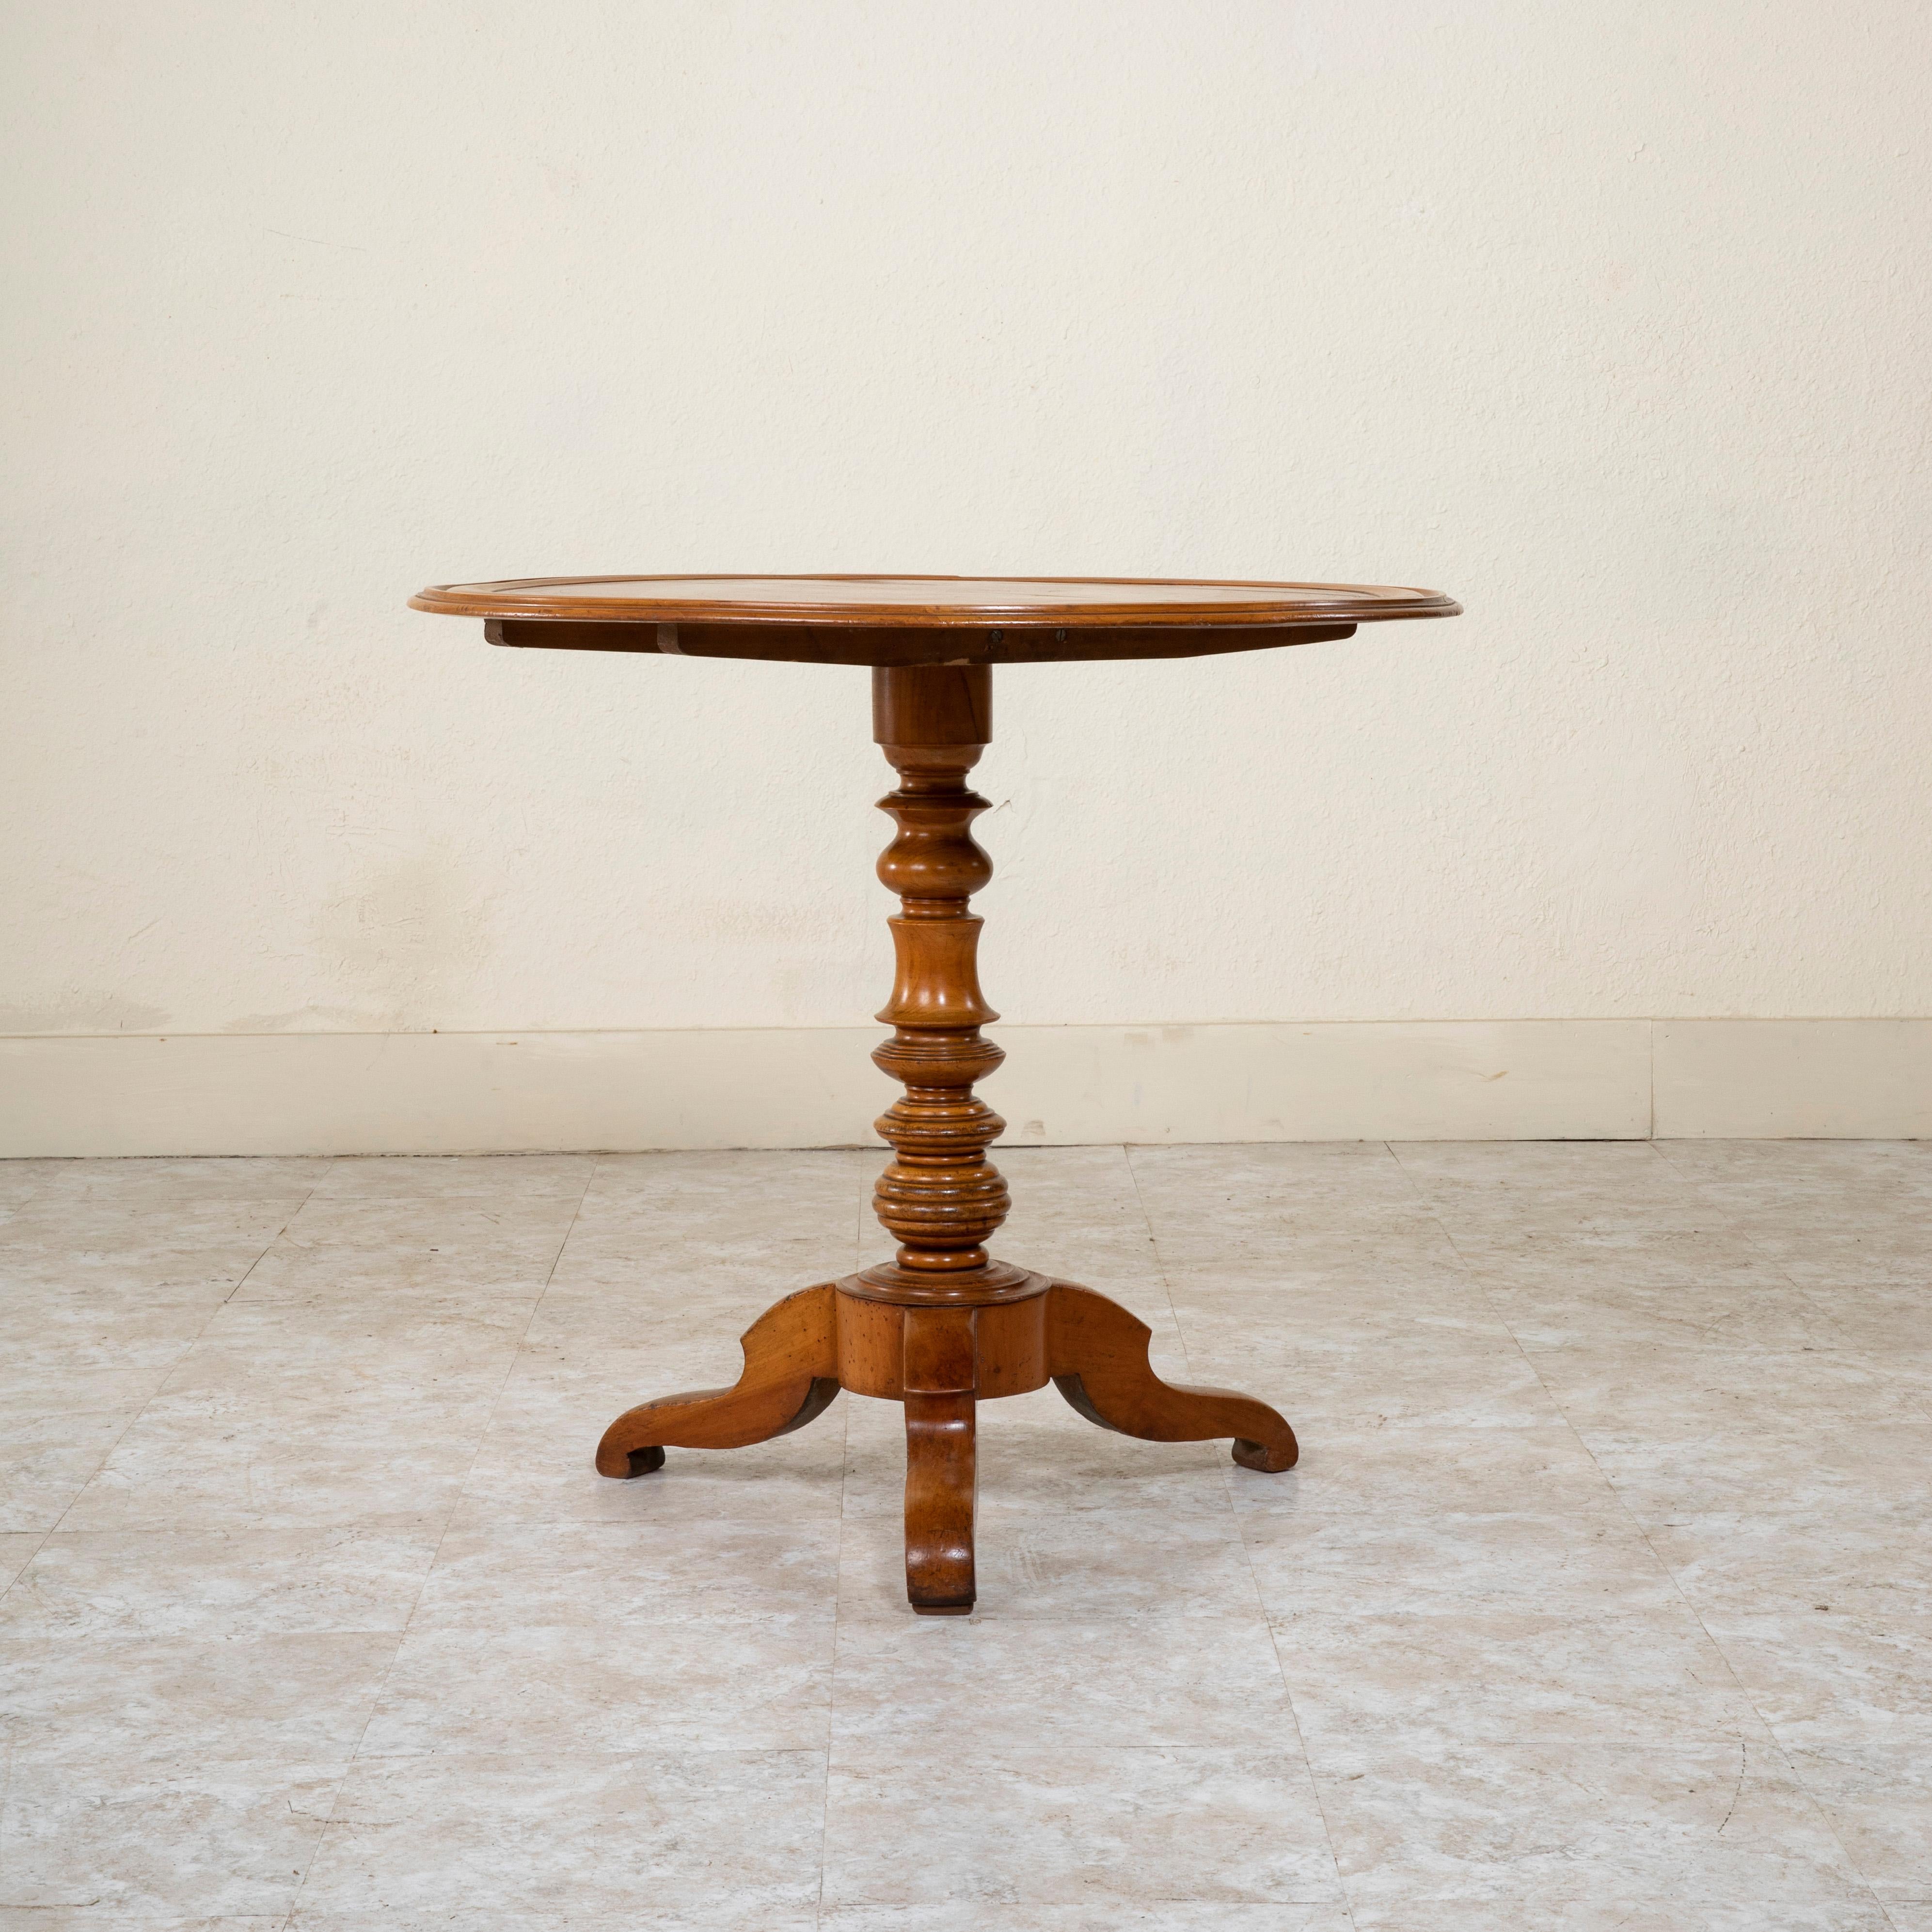 Constructed of walnut, this French Louis Philippe period gueridon or pedestal side table features a multi beveled top with concentric rings of ebonized pearwood. The top rests on a central turned pillar supported by a tripod base. An ideal table to